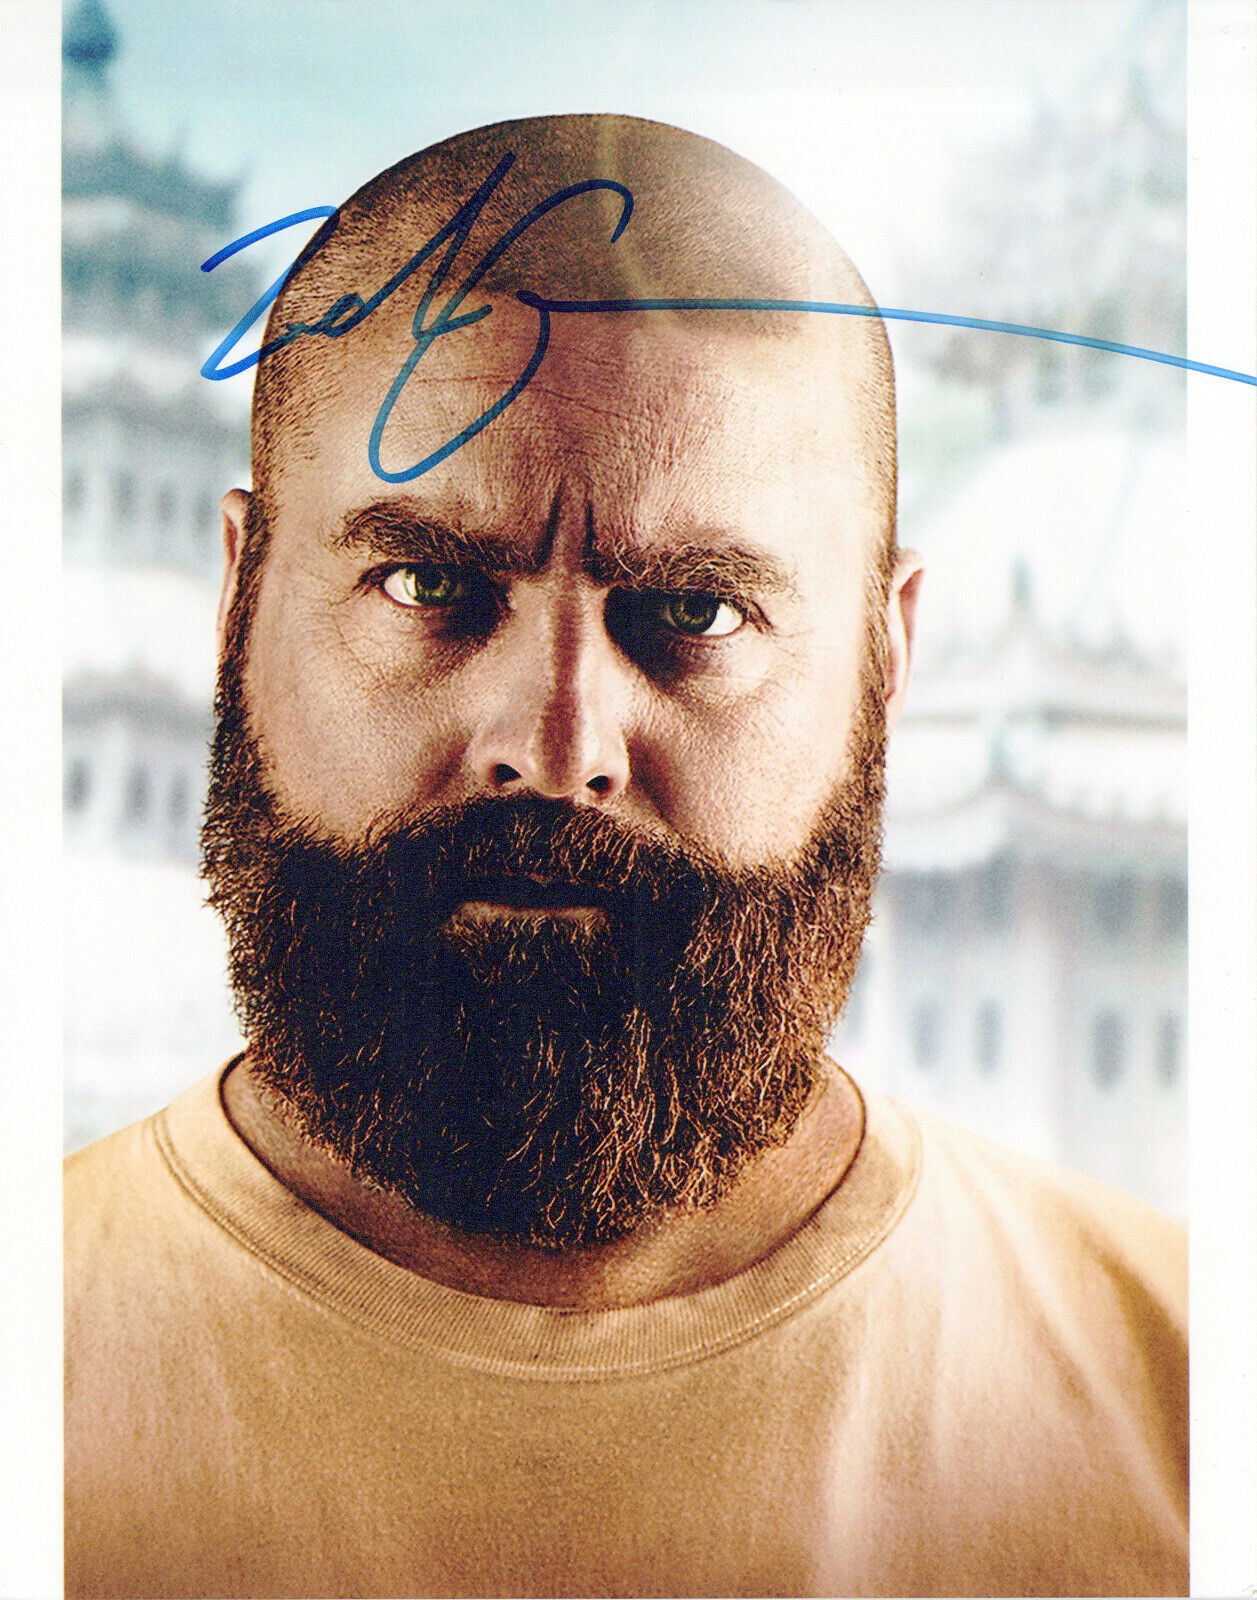 Zach Galifianakis The Hangover Part II autographed Photo Poster painting signed 8x10 #1 Alan